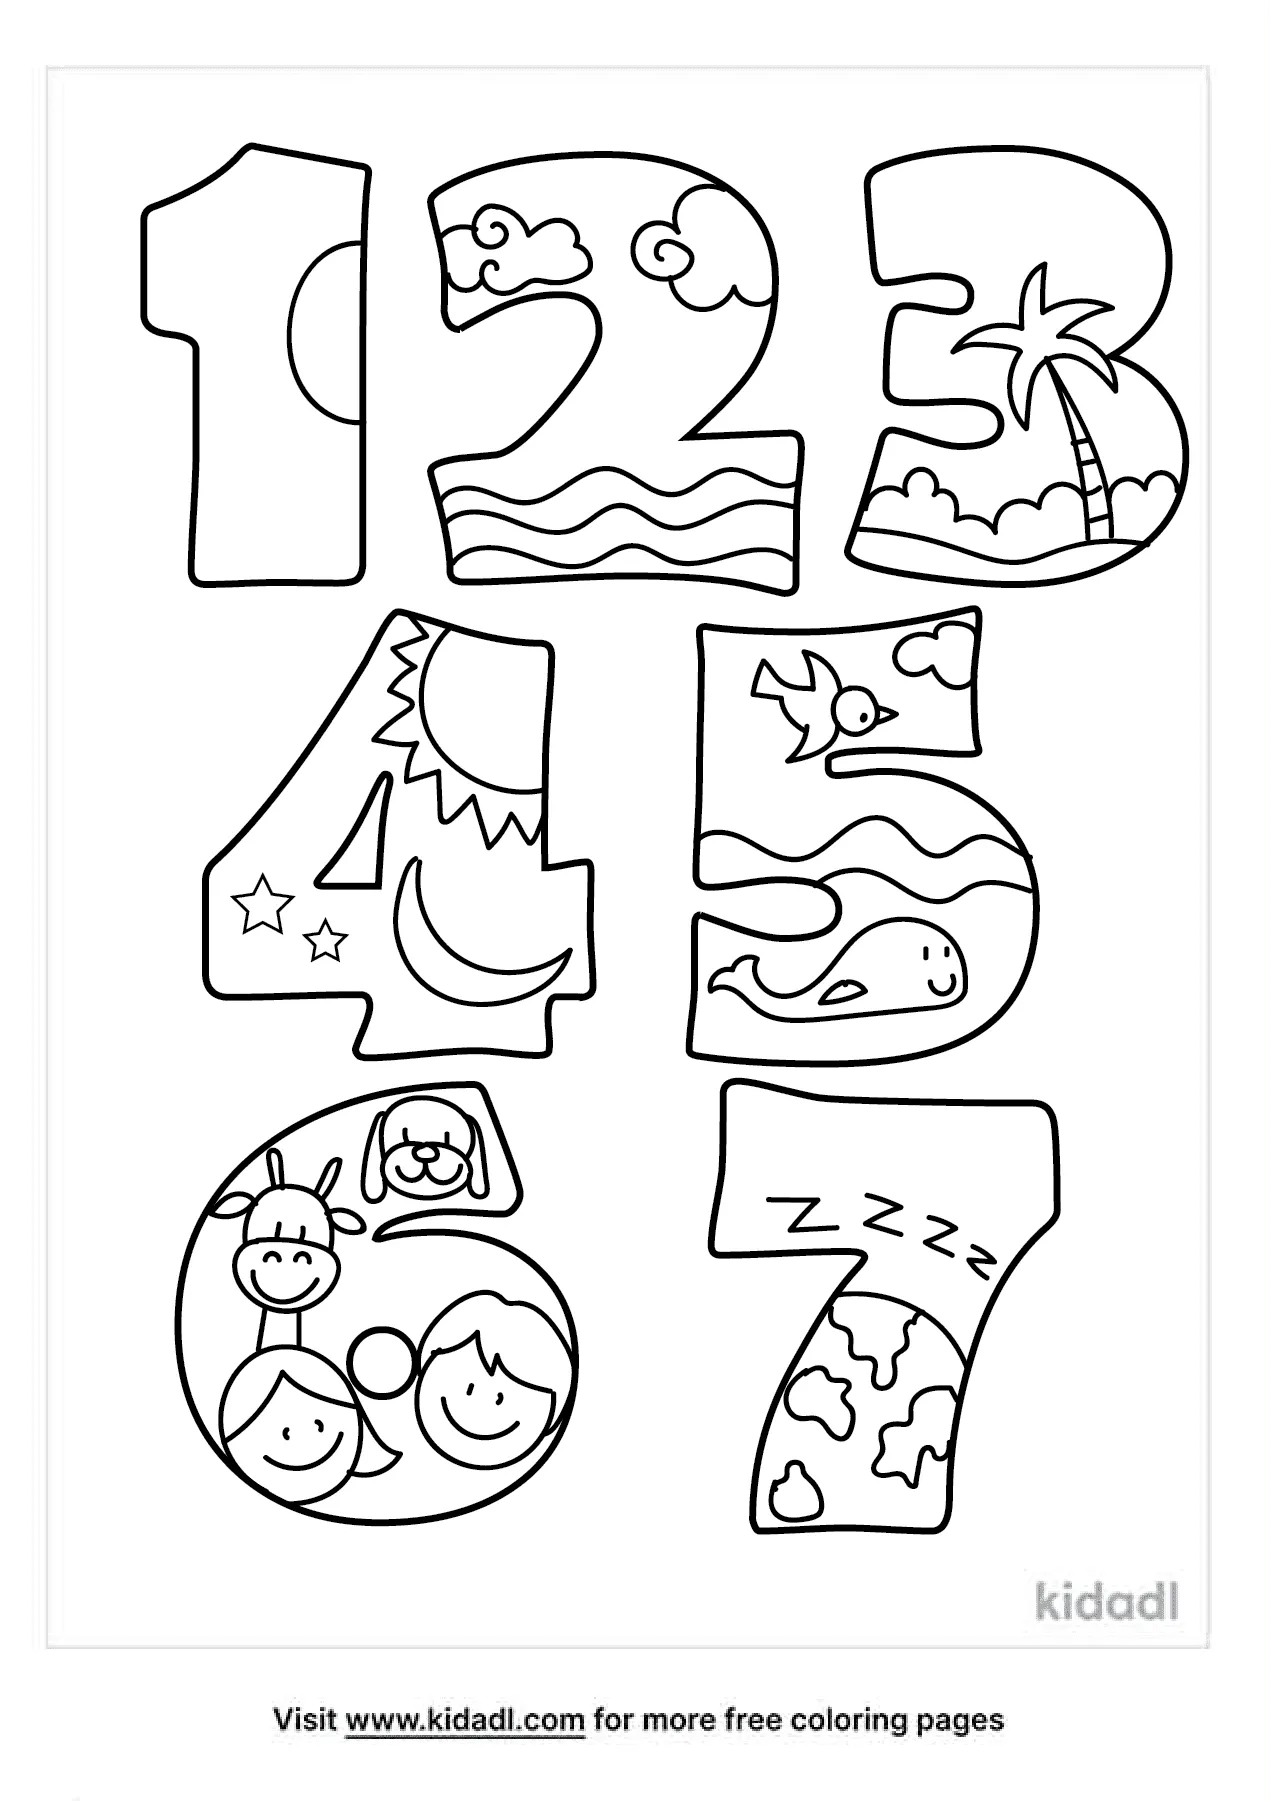 Free days of creation coloring page coloring page printables